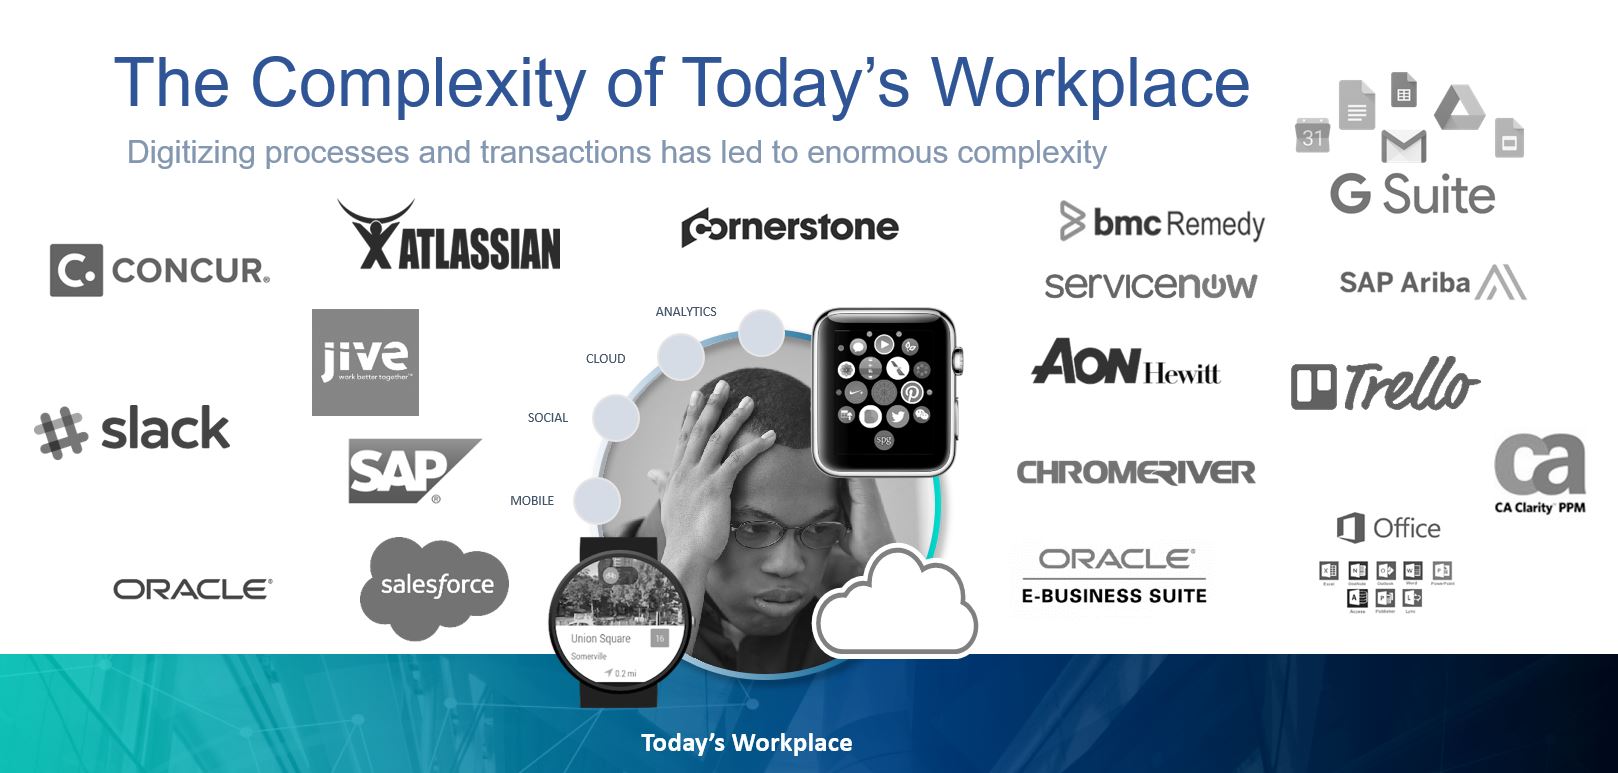 Digitizing processes and transactions has led to enormous complexity in the workplace as a employees must learn and leverage numerous apps and systems throughout the day.